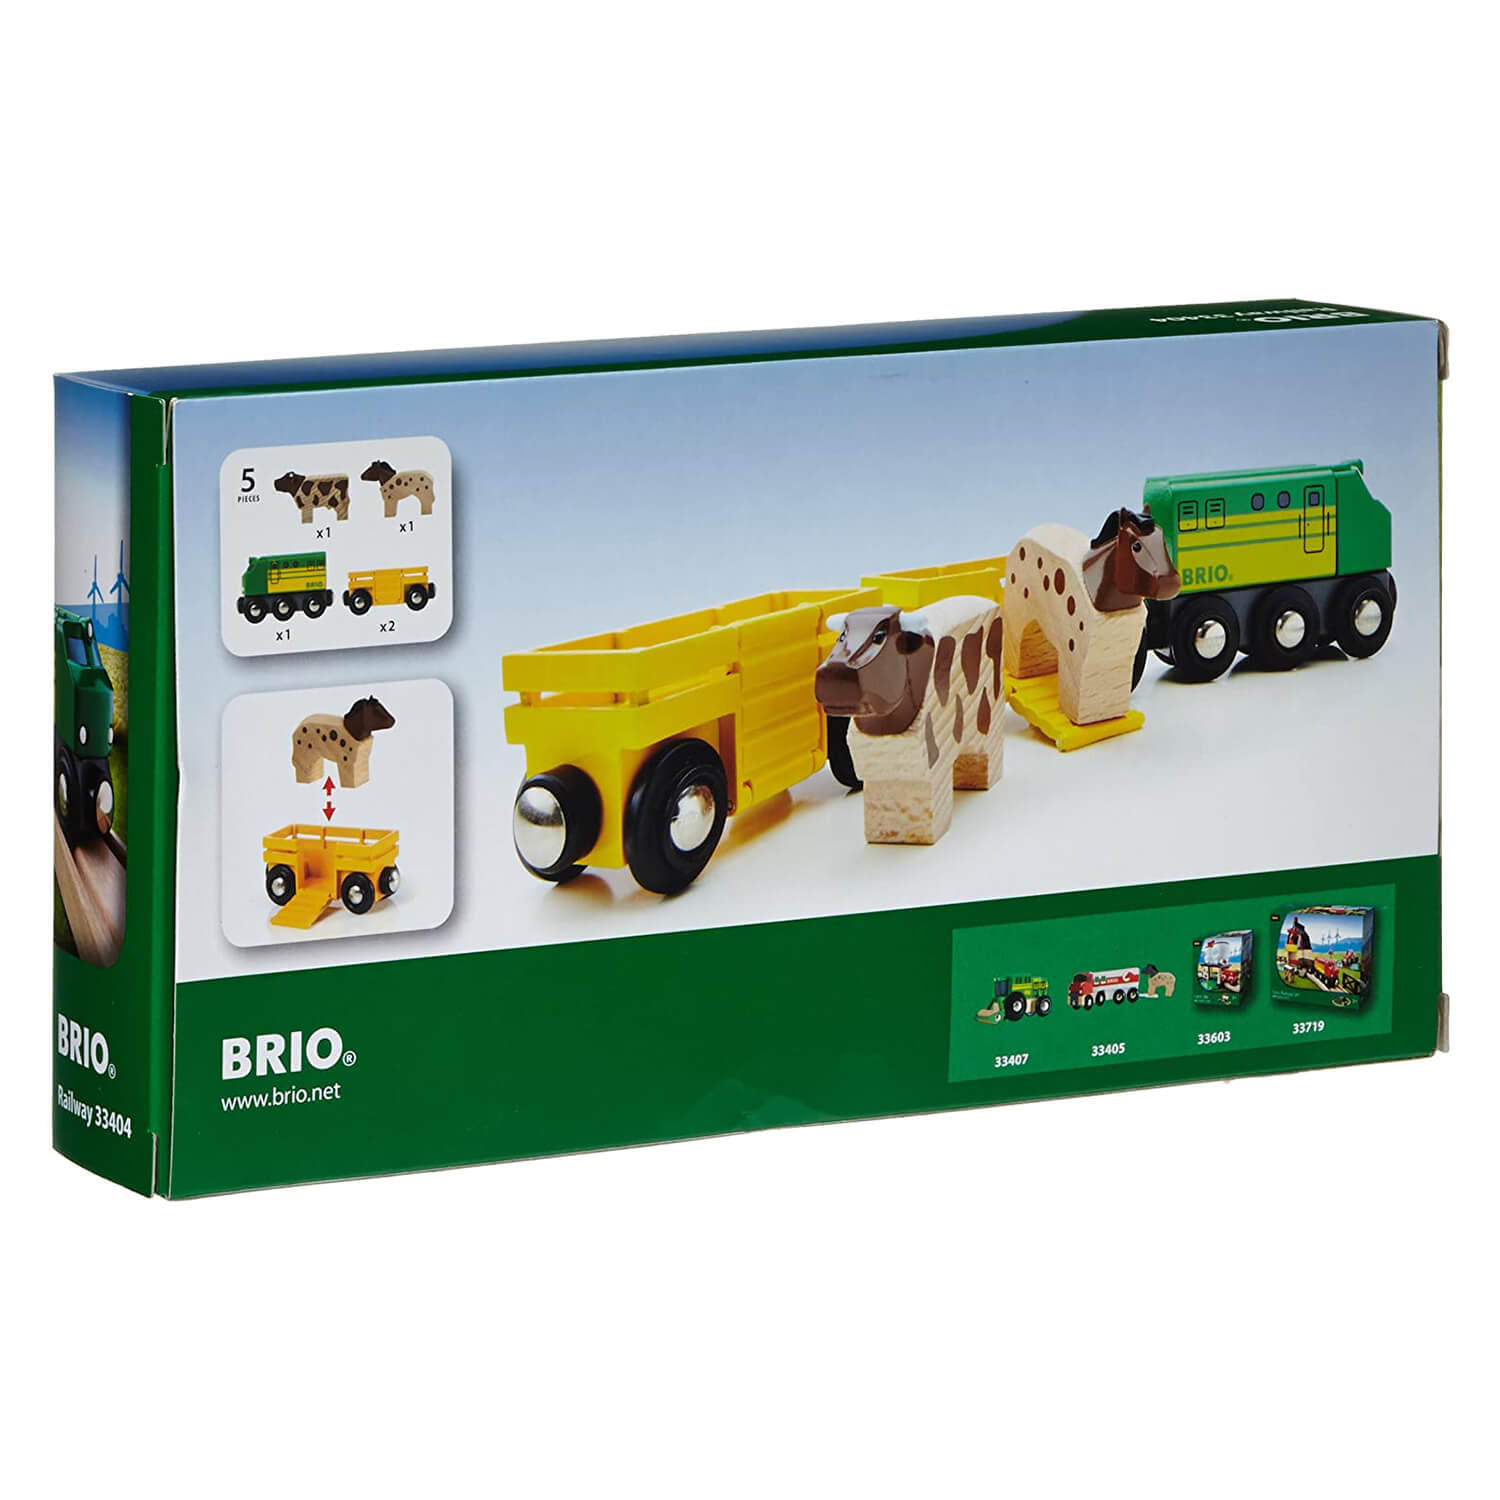 Back view of Brio Classic Figure 8 Train Set package.